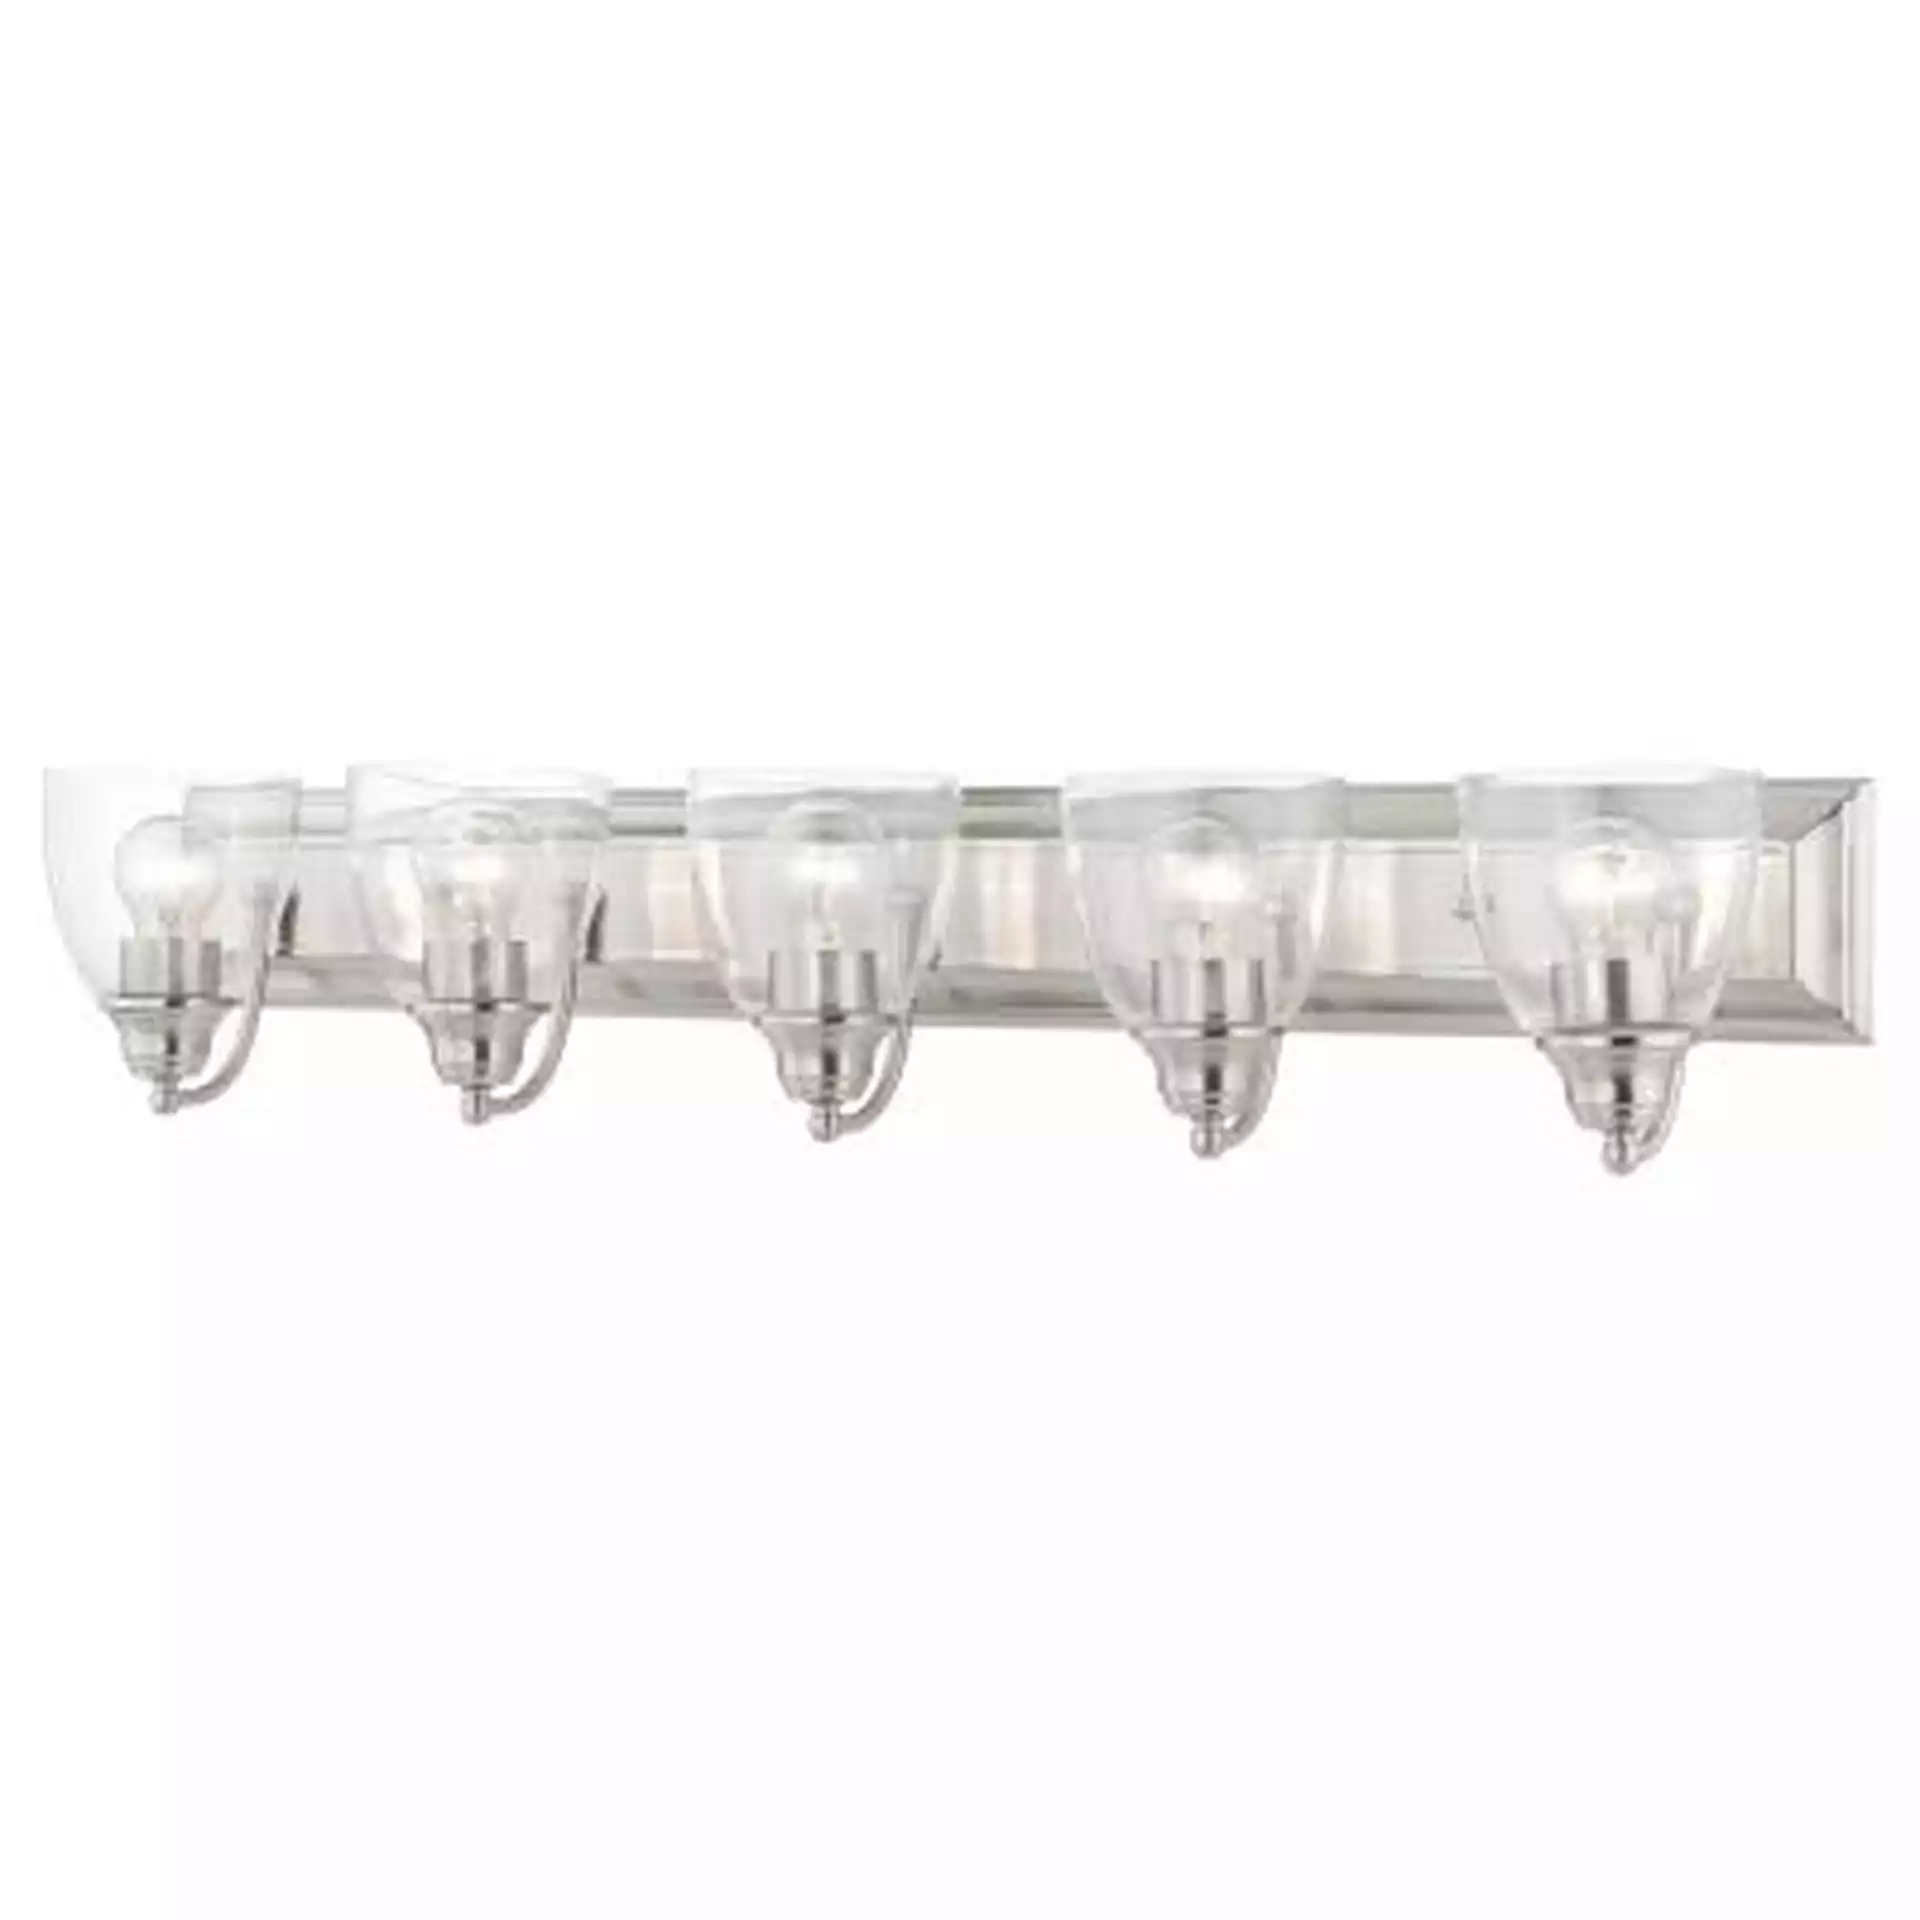 LIVEX LIGHTING Birmingham 36 in. 5-Light Brushed Nickel Vanity Light with Hand Blown Clear Glass Shade